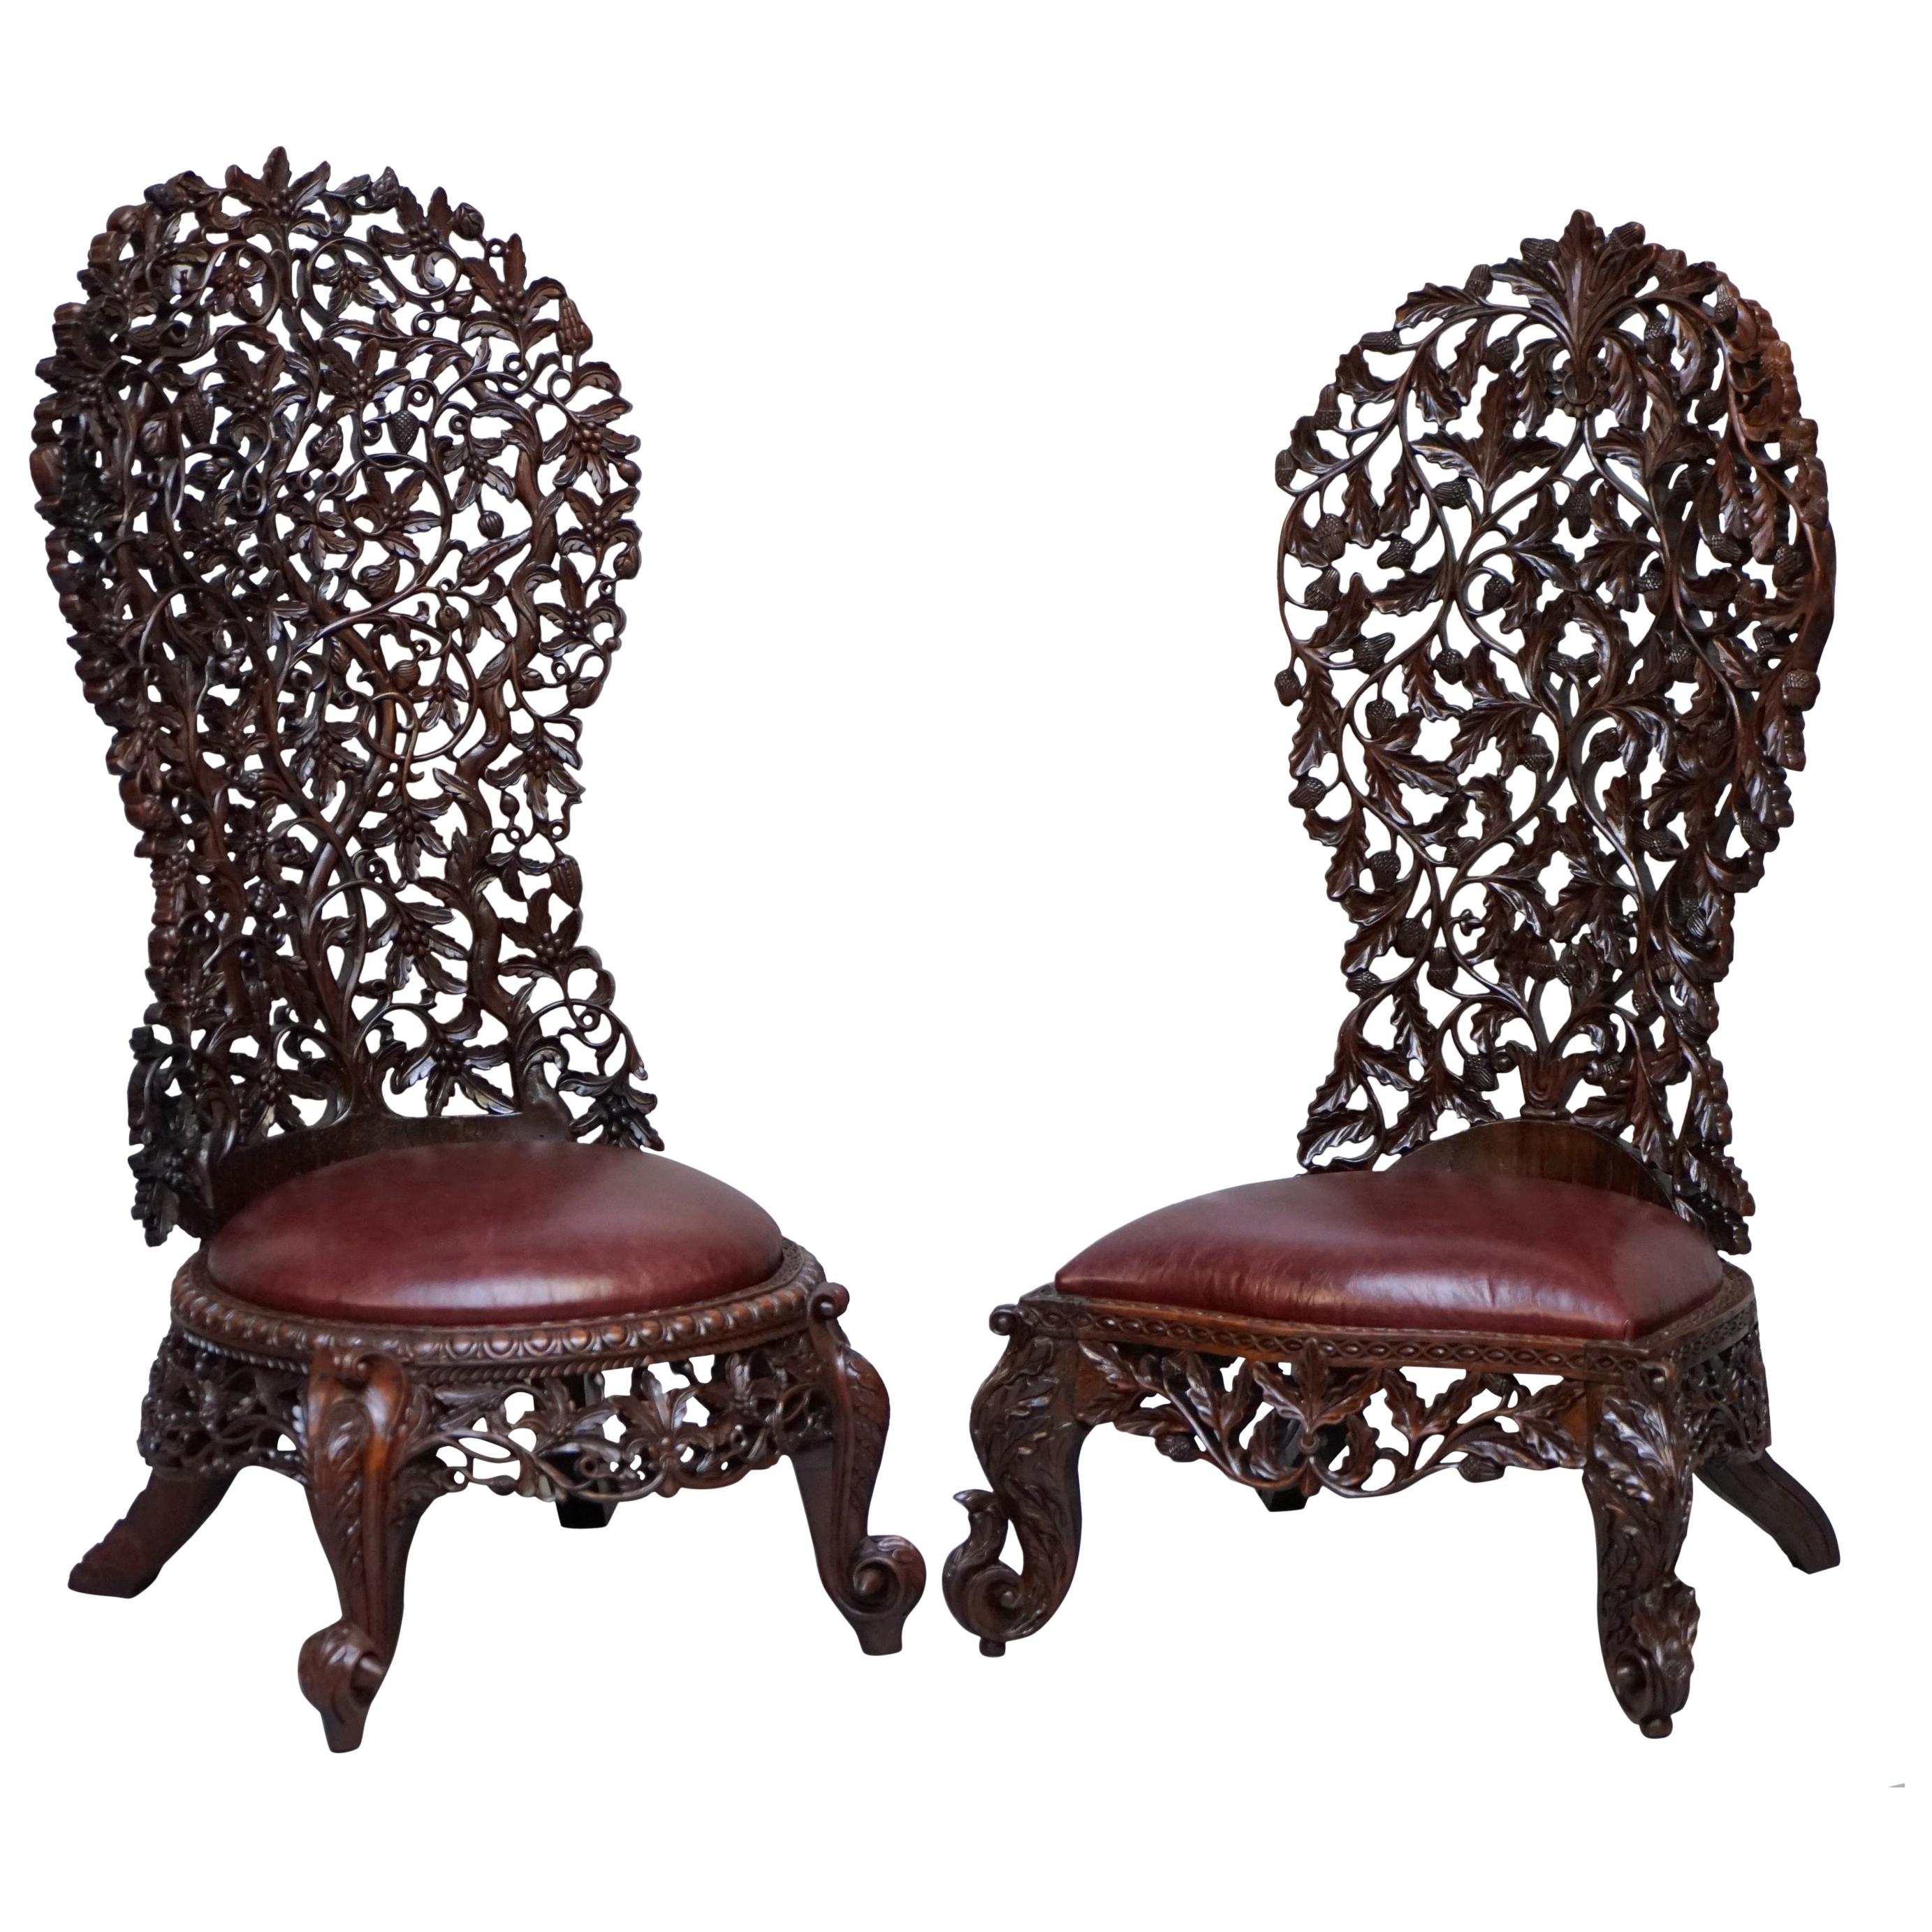 Victorian Rare Wood Hand Carved Anglo Indian Burmese Chairs Oxblood Leather Pair